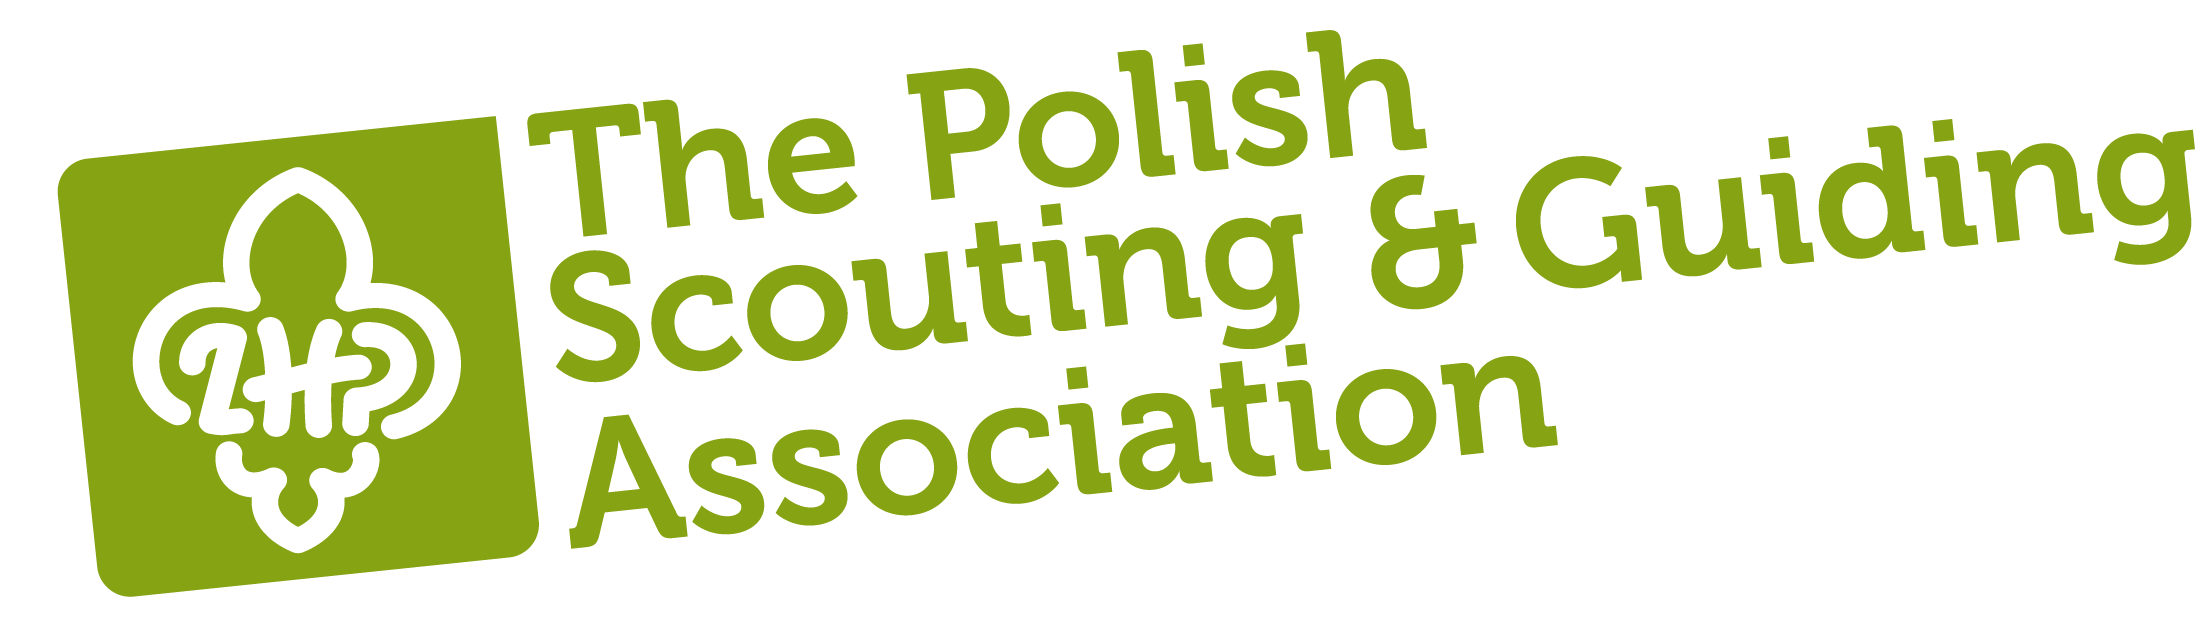 Polish Scouting and Guiding Association (ZHP)
